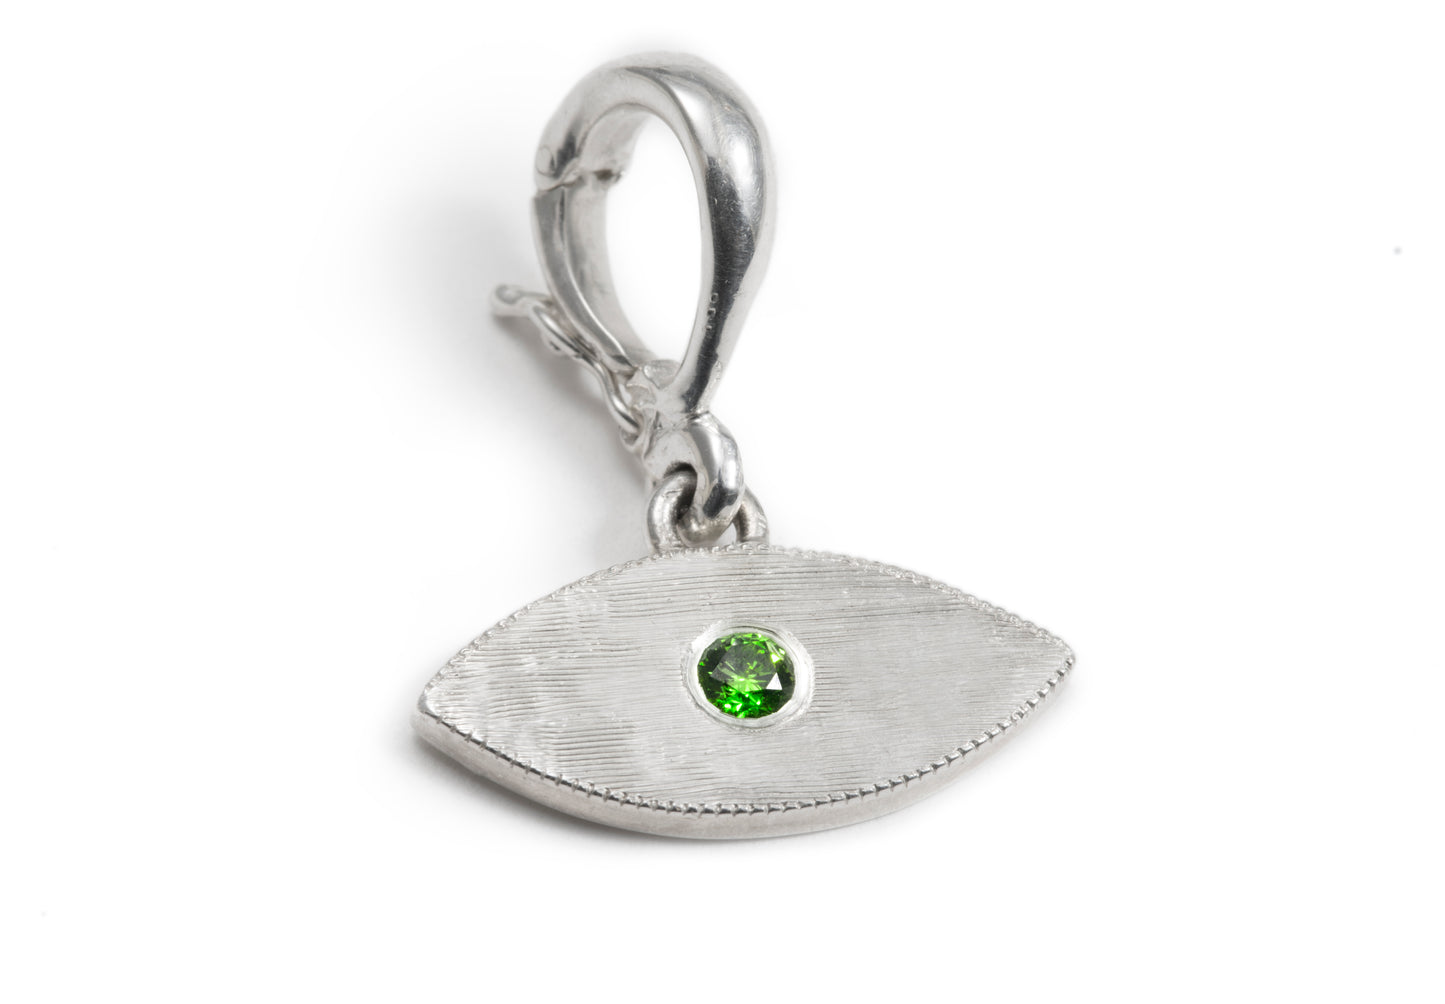 The Evil Eye Protection Pendant with Birthstone